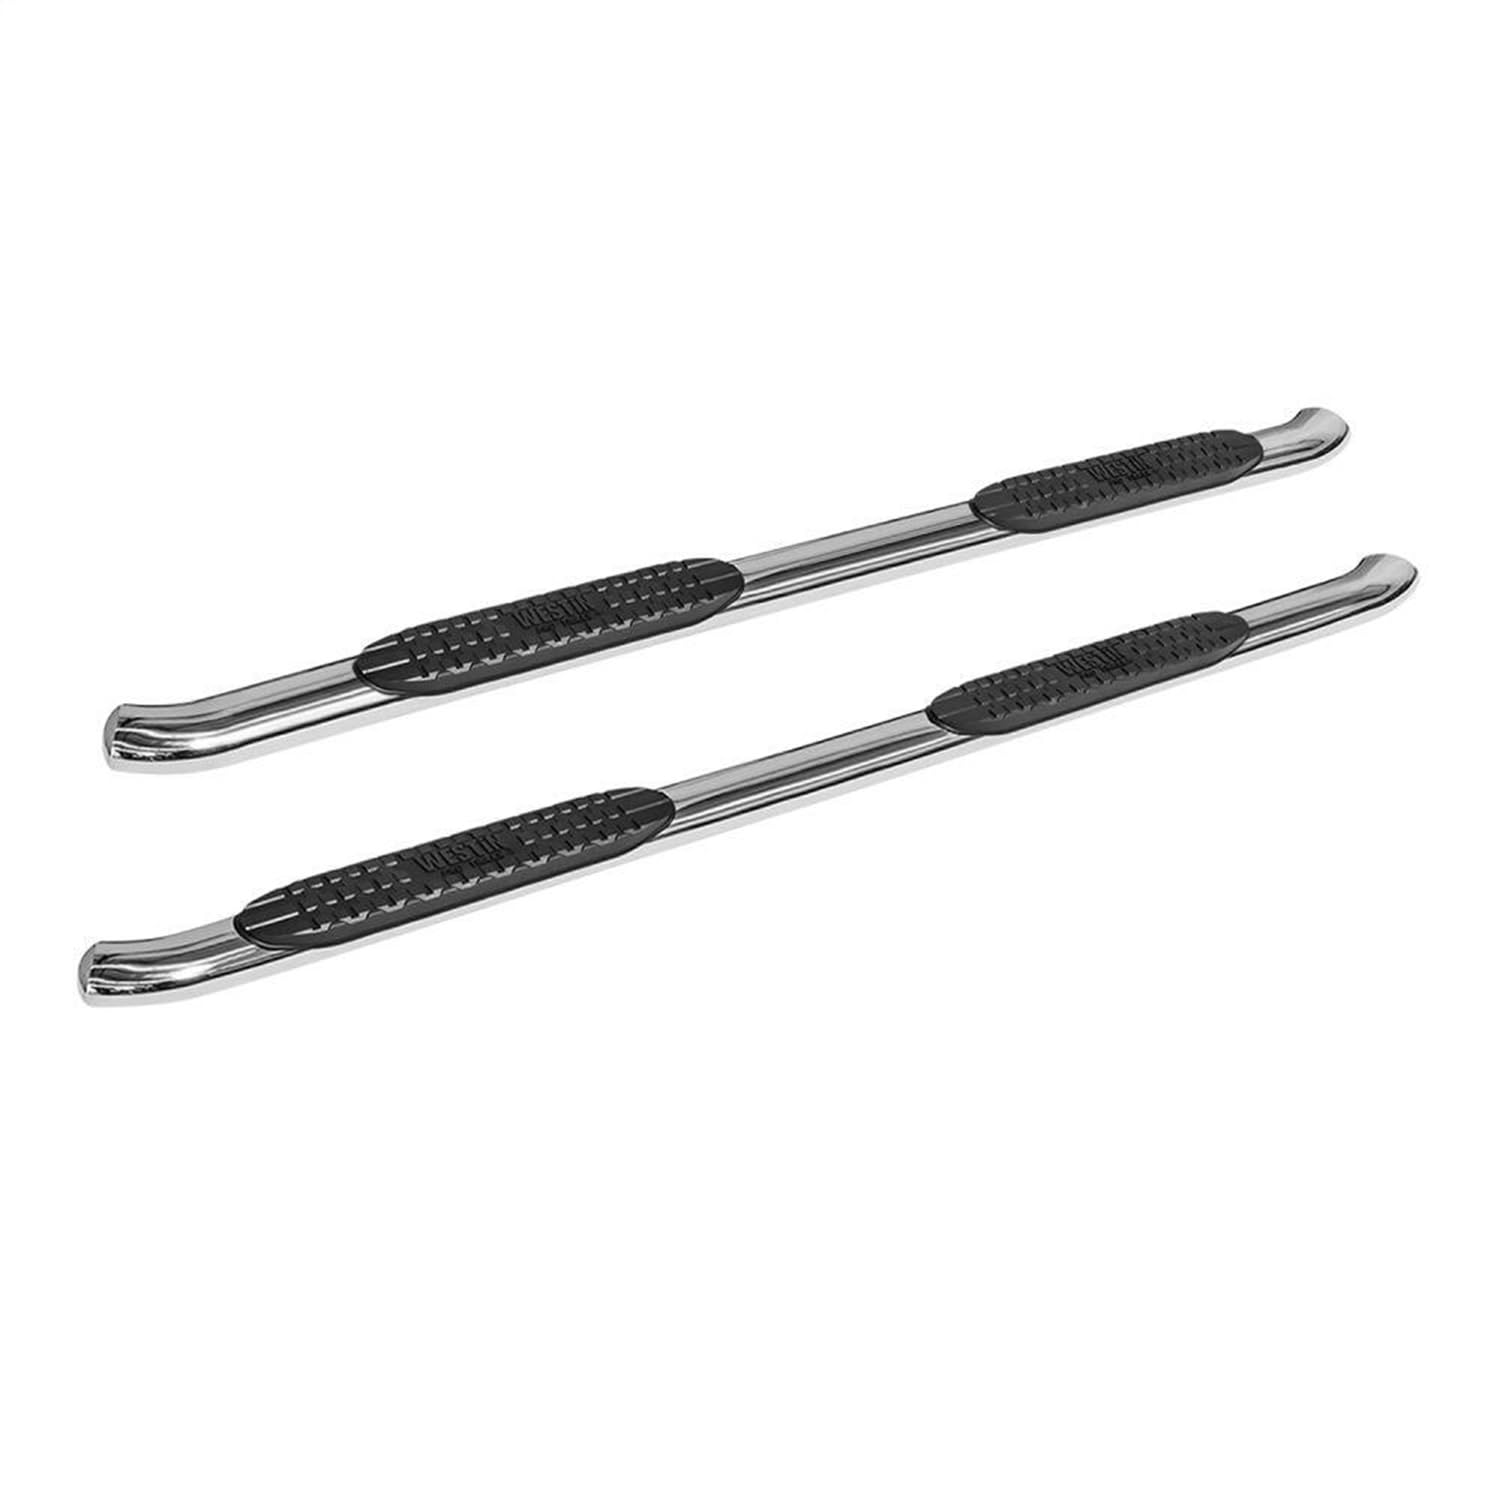 19C RANGER SUPERCAB PRO TRAXX 4 OVAL NERF STEP BARS STAINLESS STEEL